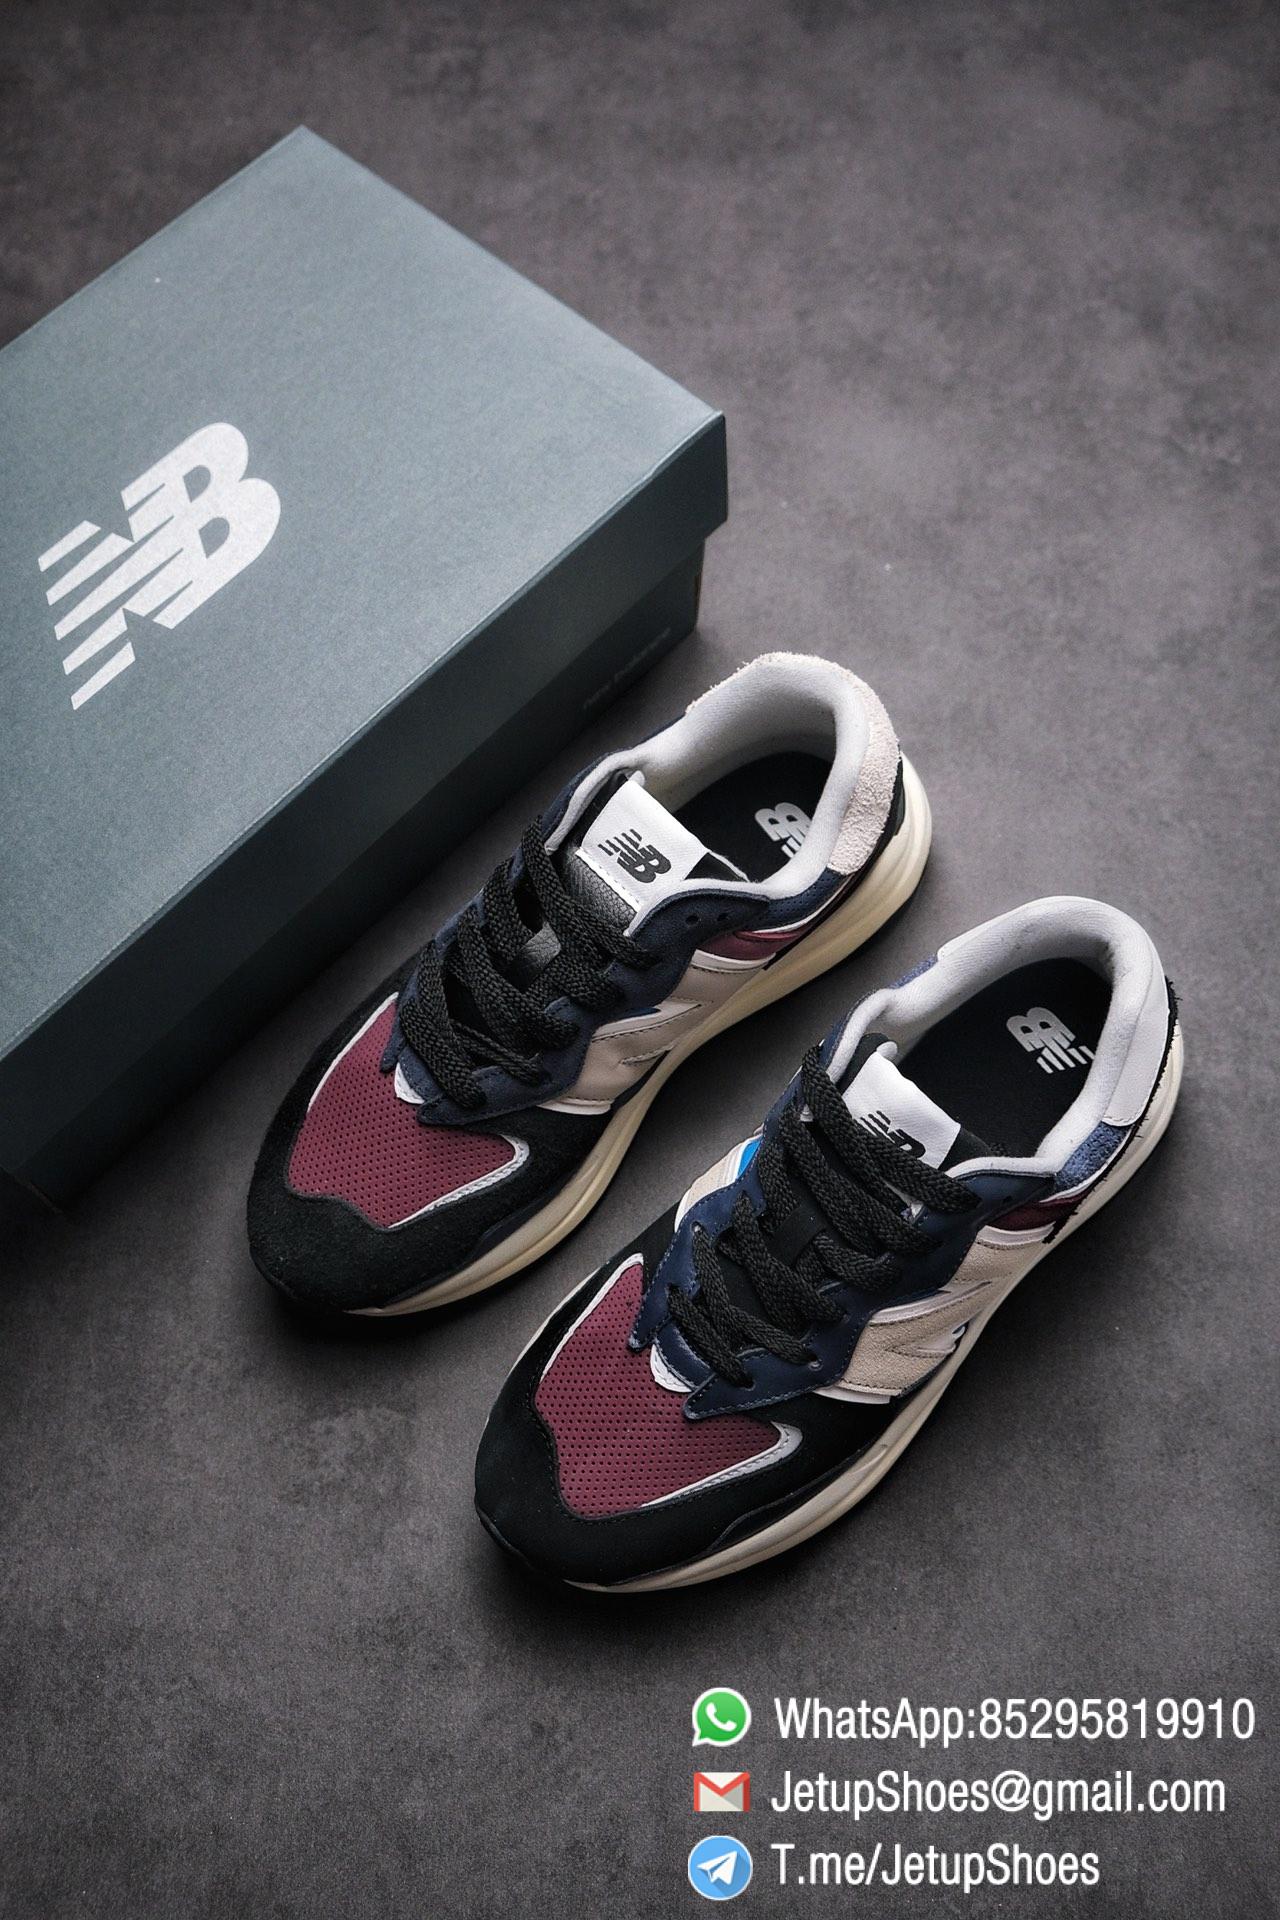 Best Replica New Balance 57 40 Navy Burgundy SKU M5740TB Navy And Burgundy Panels Appear Top Quality 04